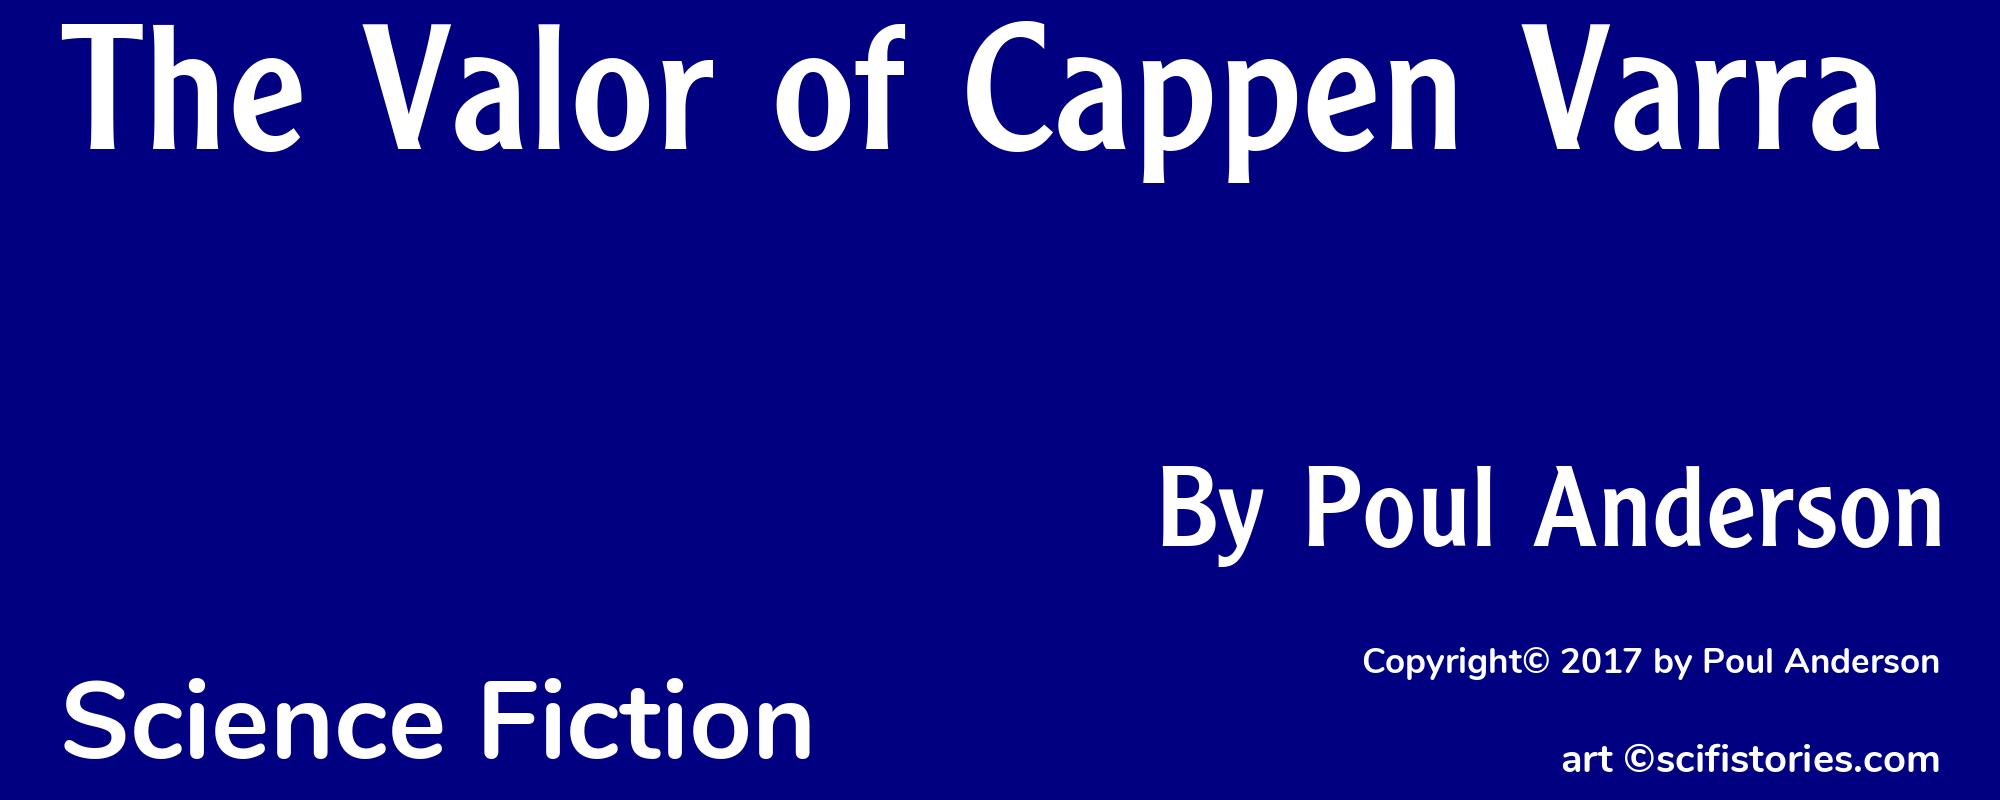 The Valor of Cappen Varra - Cover